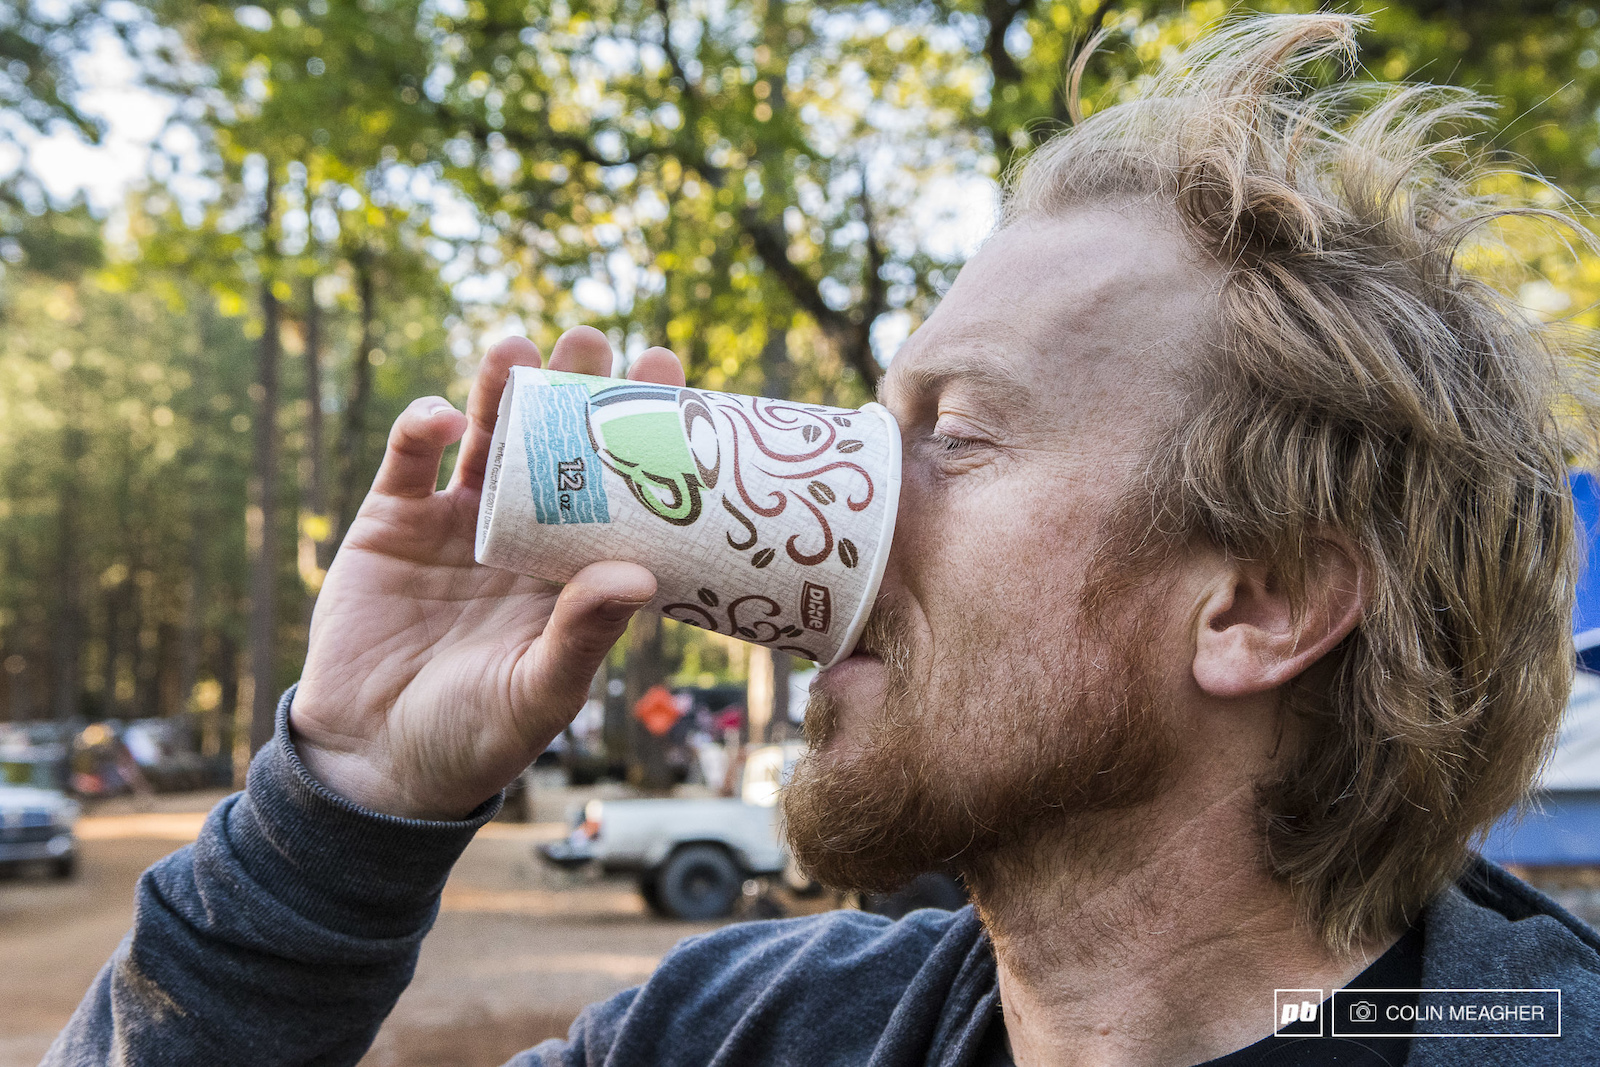 Race day came way too early for Nathan Riddle: not enough coffee to fuel up the Santa Cruz/WTB hard man.